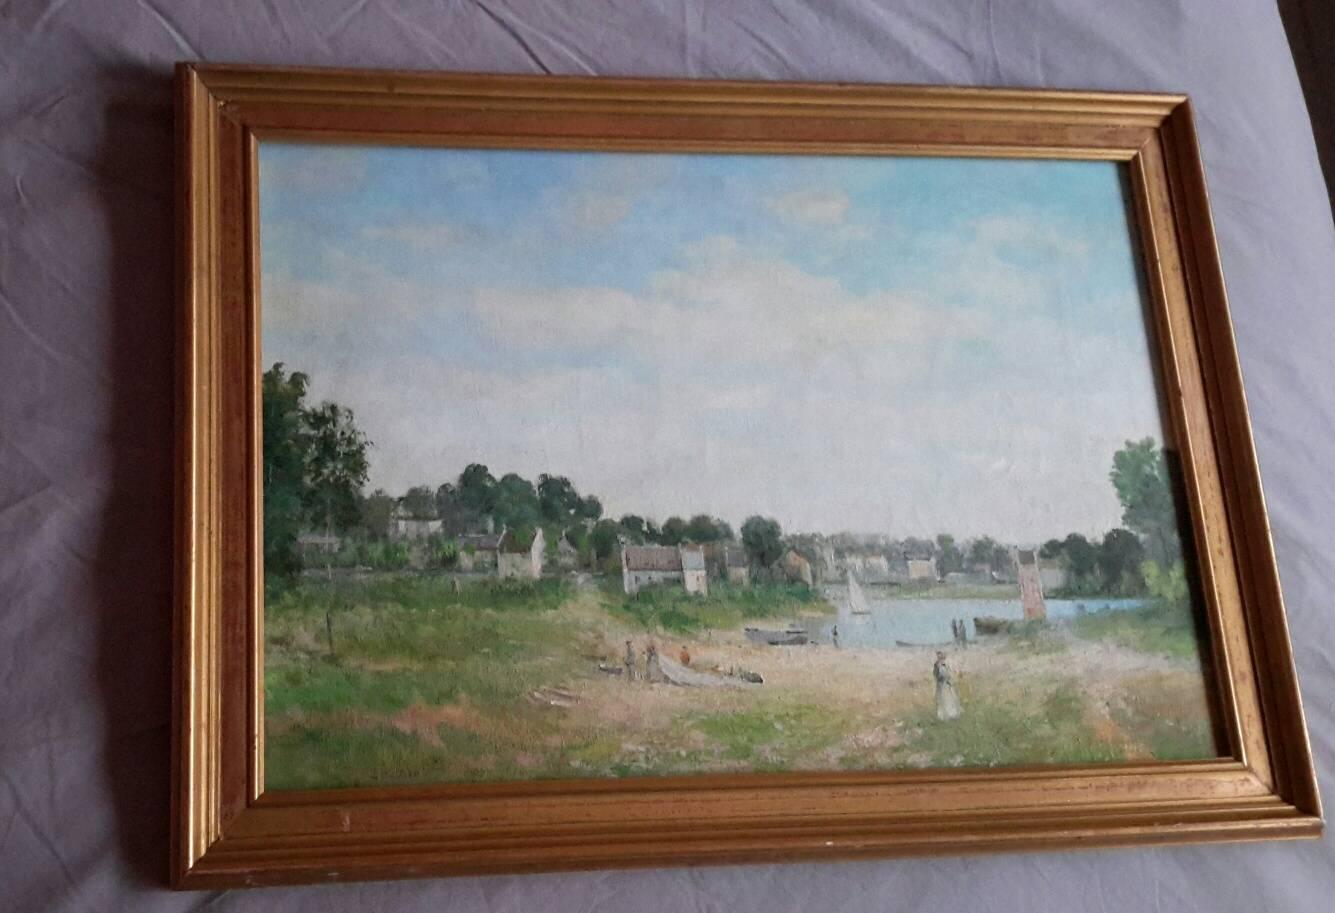 Post Impressionist Style landscape Oil on canvas  painting signed  by Polish artist Jan Znosko representing a life scene in Brittany, France in the beginning of the 20th Century.
In a excellent  general condition .

In a lovely wood and gold stucco